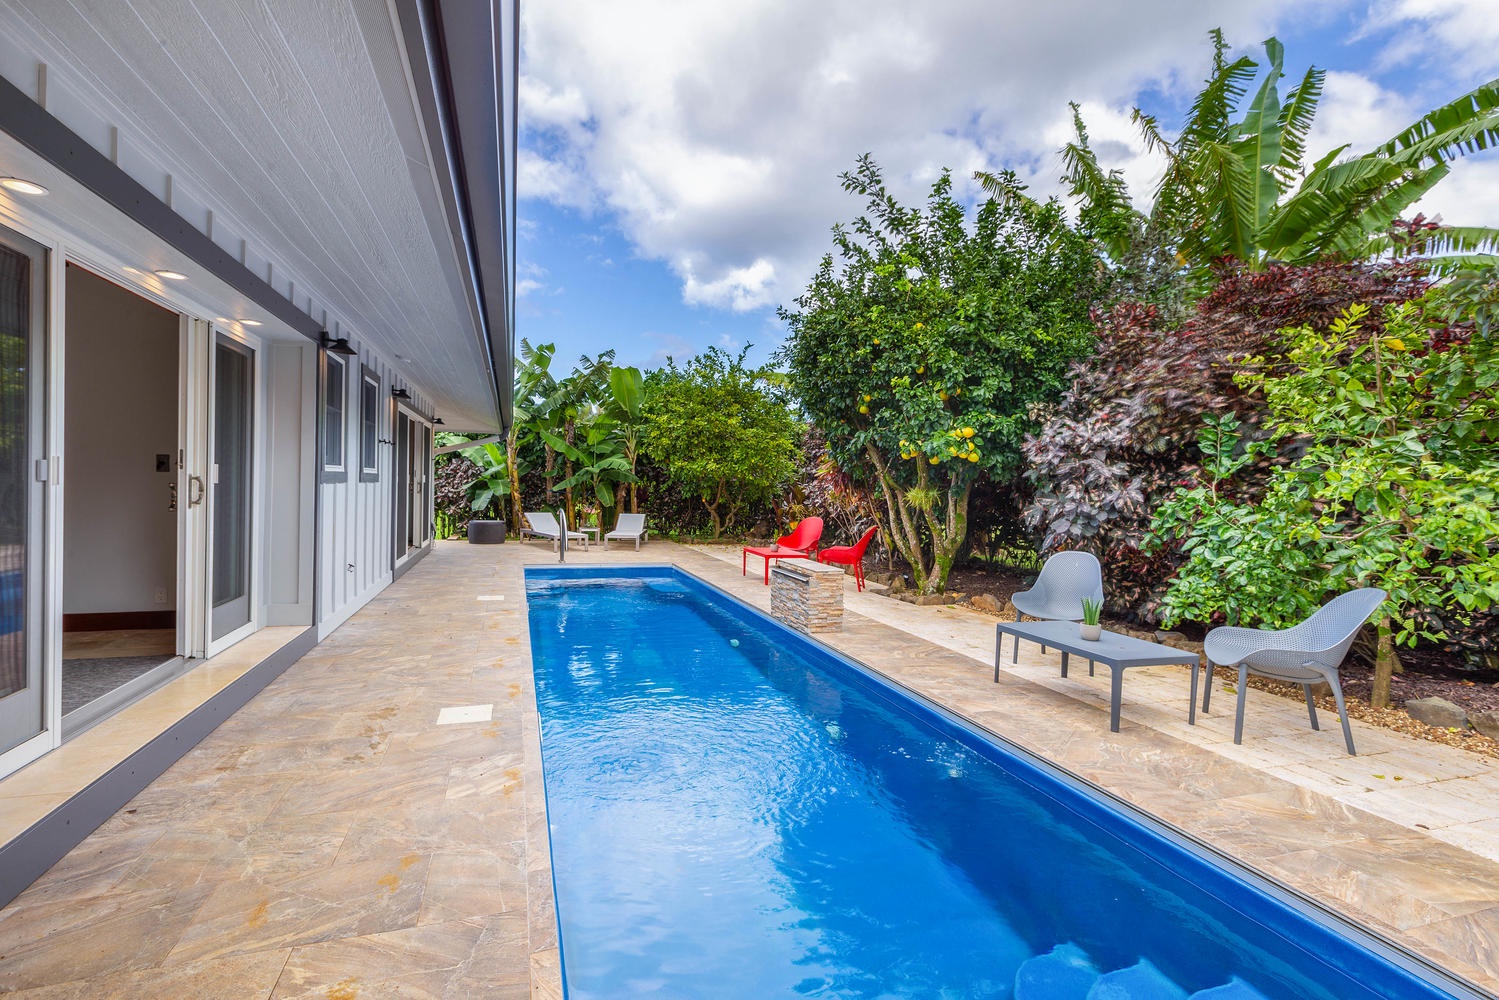 Princeville Vacation Rentals, Makana Lei - Take a dip in the private lap pool